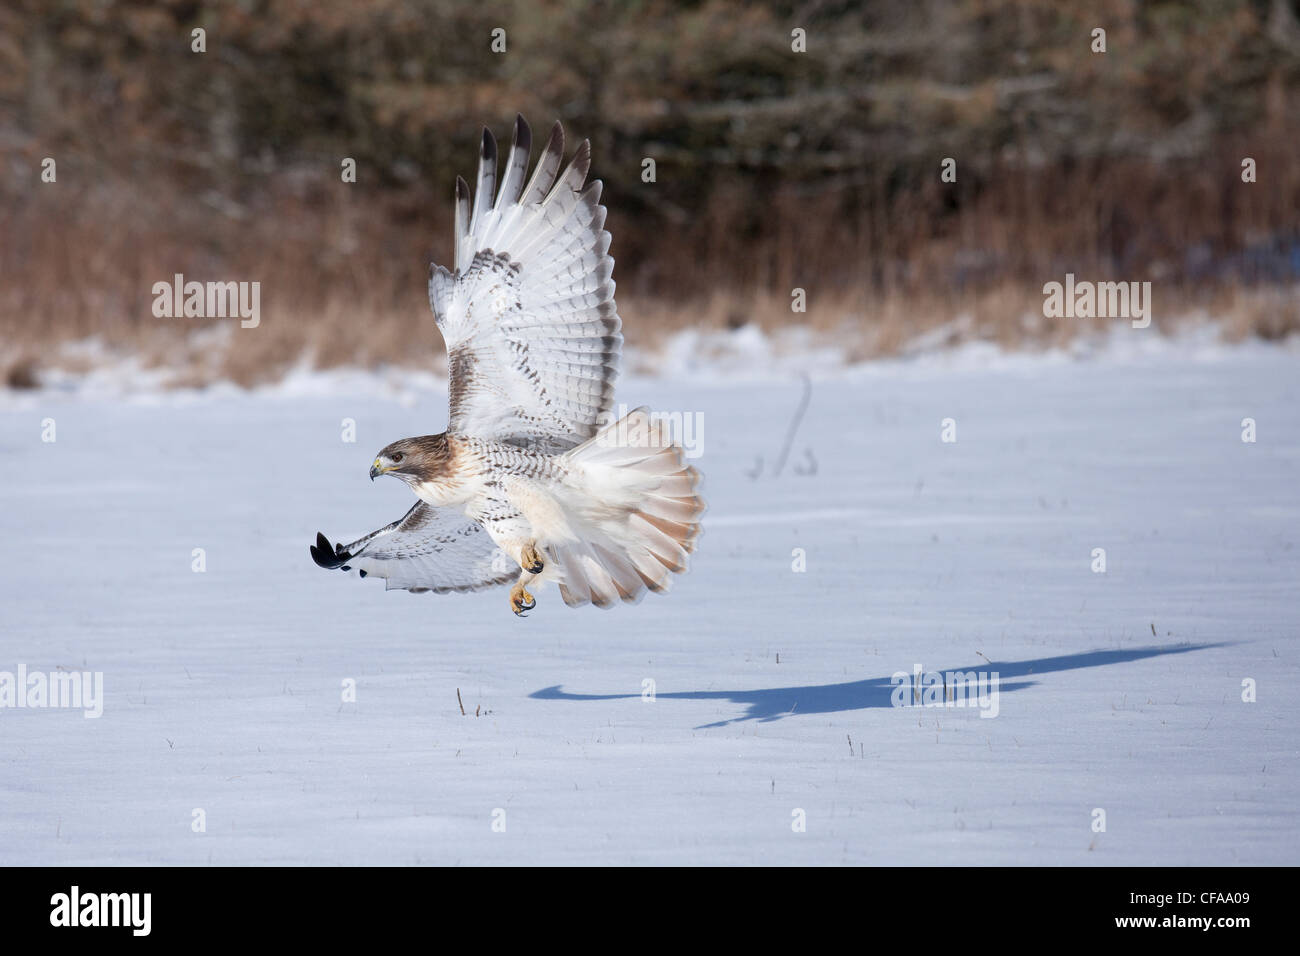 A Red-tailed Hawk (Buteo jamaicensis) flies with talons ready to catch its prey in the snow Stock Photo